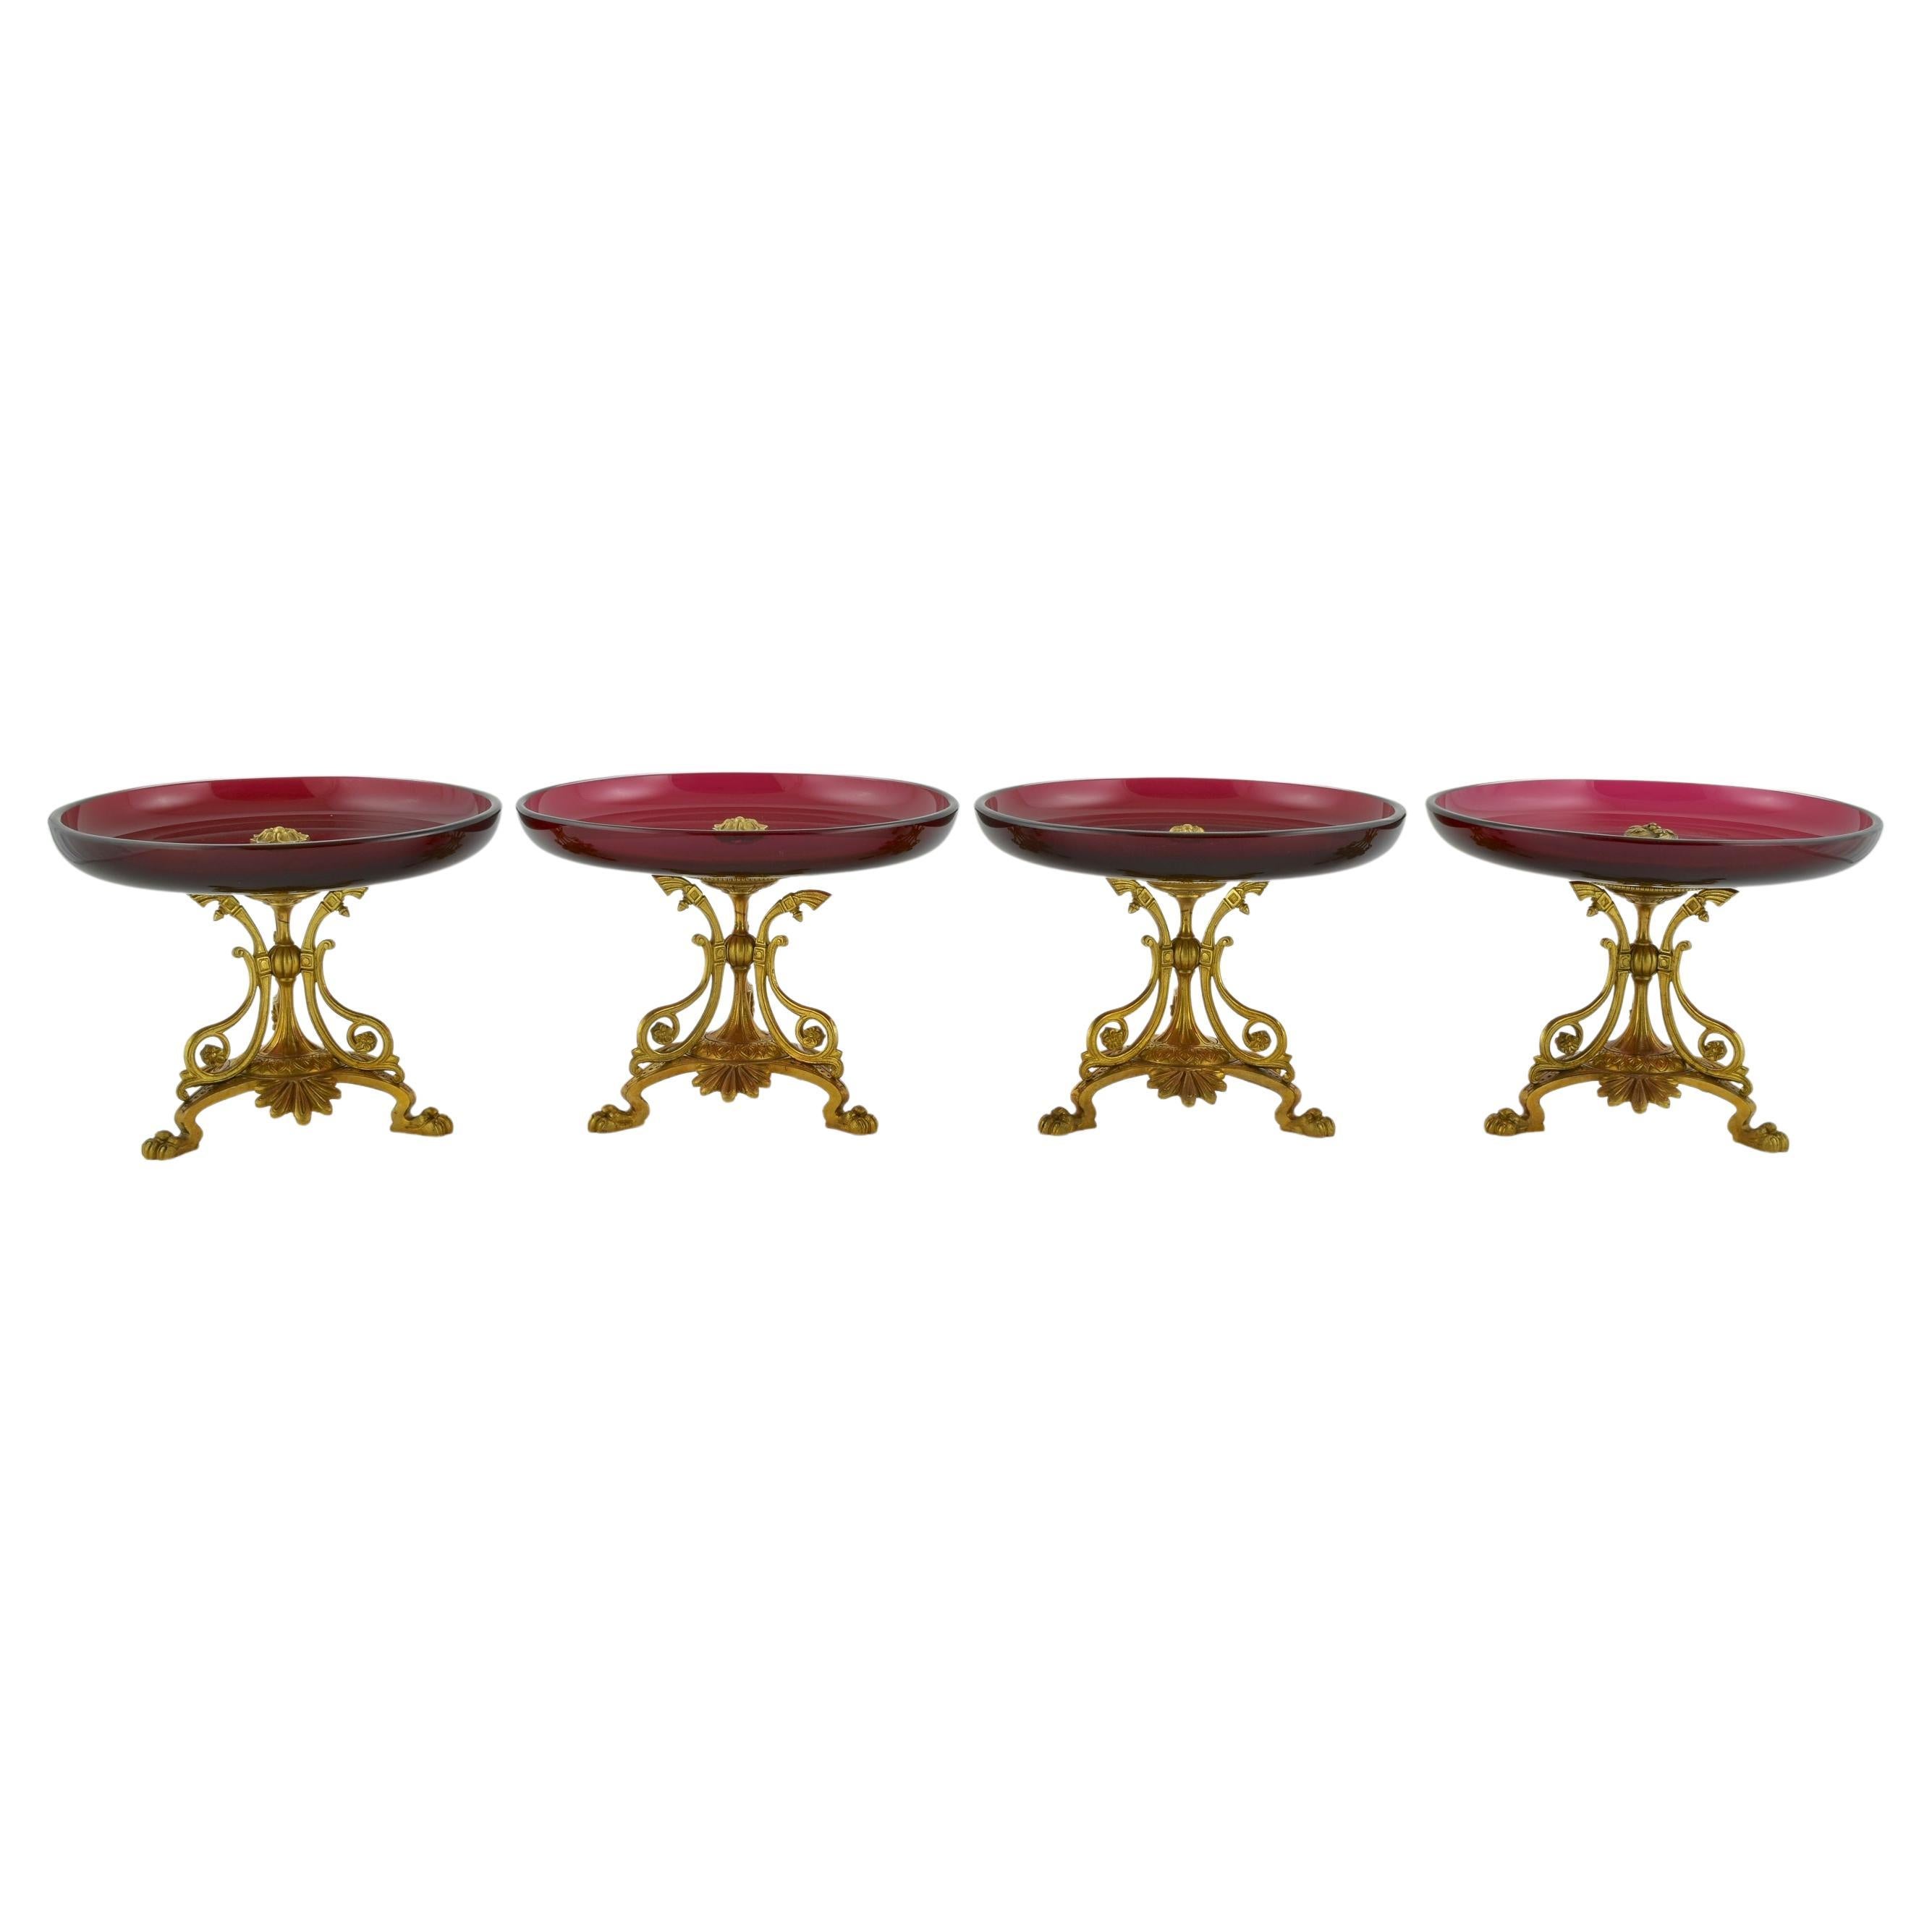 Set of 4 Late 19th Century Ormolu Ruby Glass Comport Dessert Stands For Sale